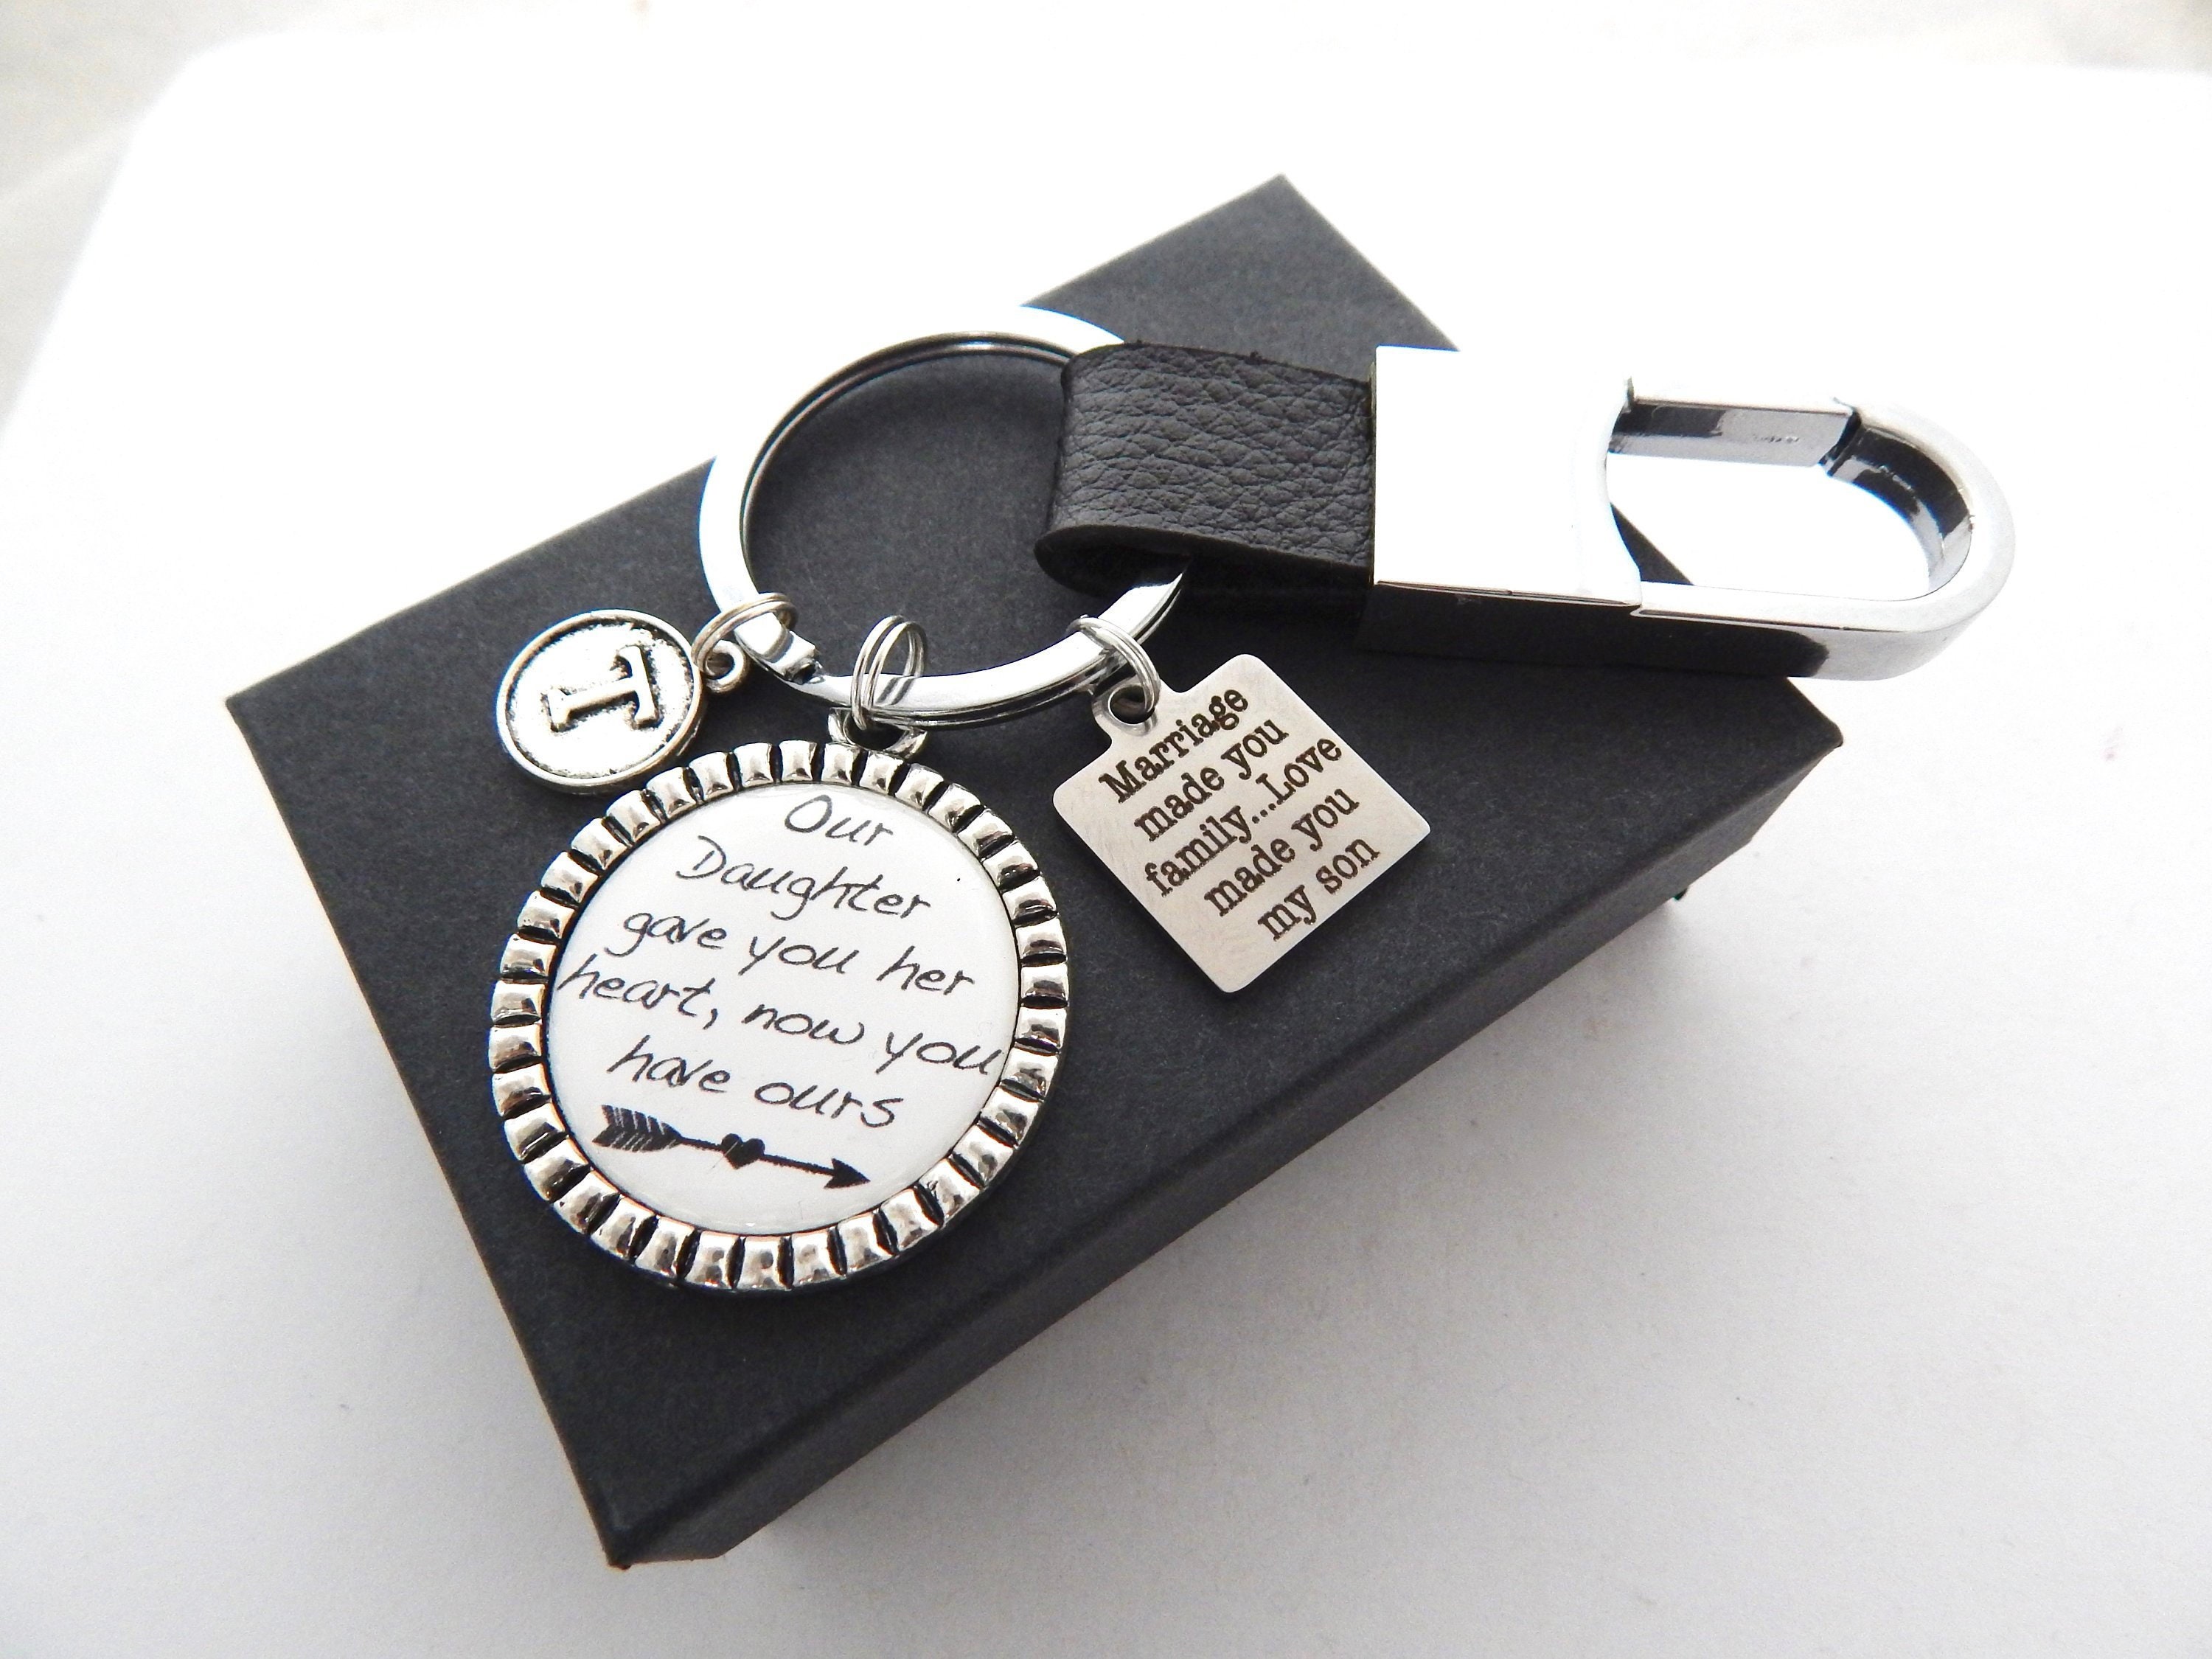 Details about   Son In Law Keychain Gifts Marriage Made You Family Love My New Year Christmas To 